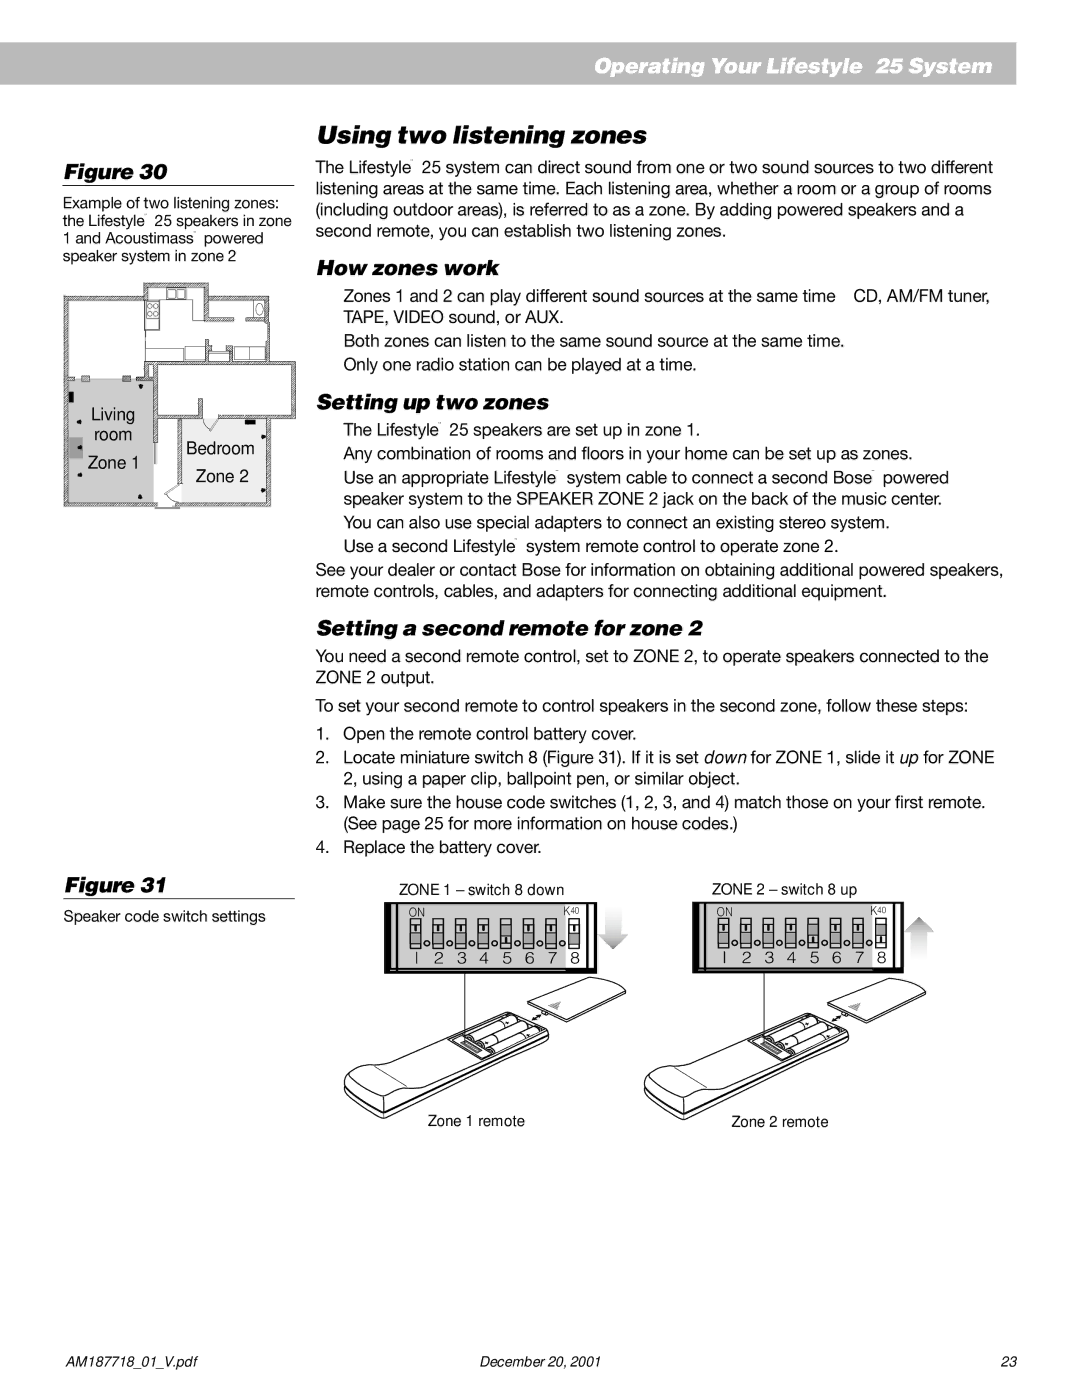 Bose 25 manual Using two listening zones, How zones work, Setting up two zones, Setting a second remote for zone 